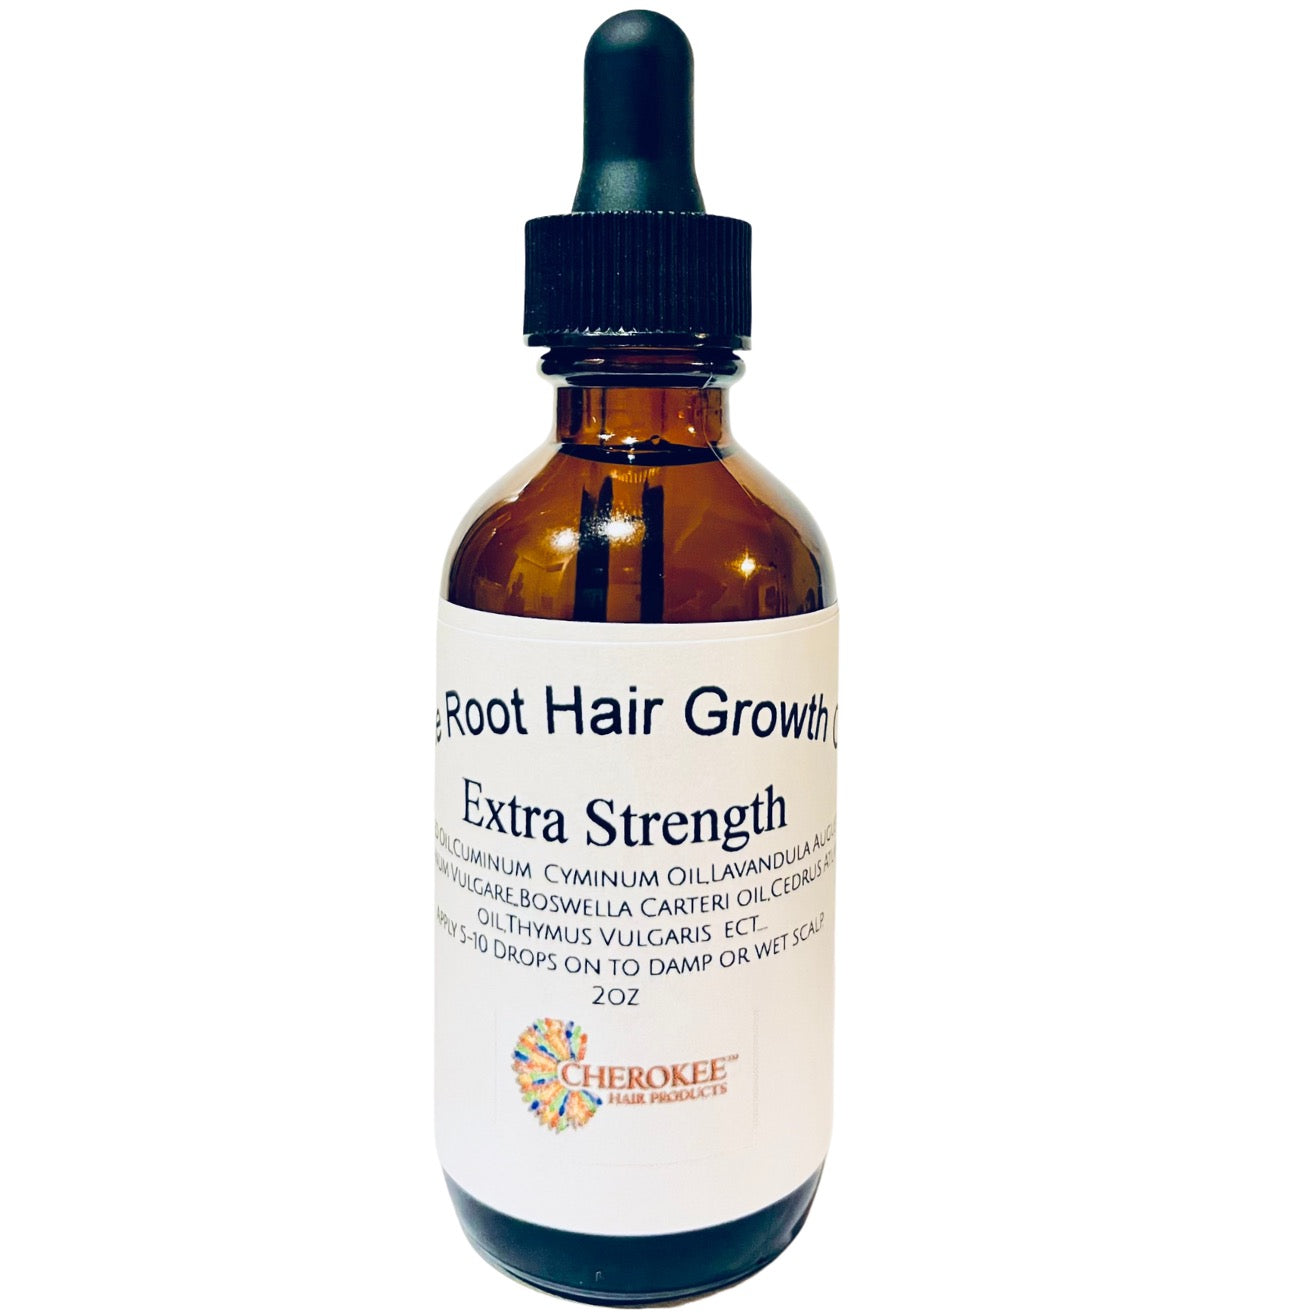 The True Root Hair Growth Oil ”Extra Strength” Frankincense Tree Oil